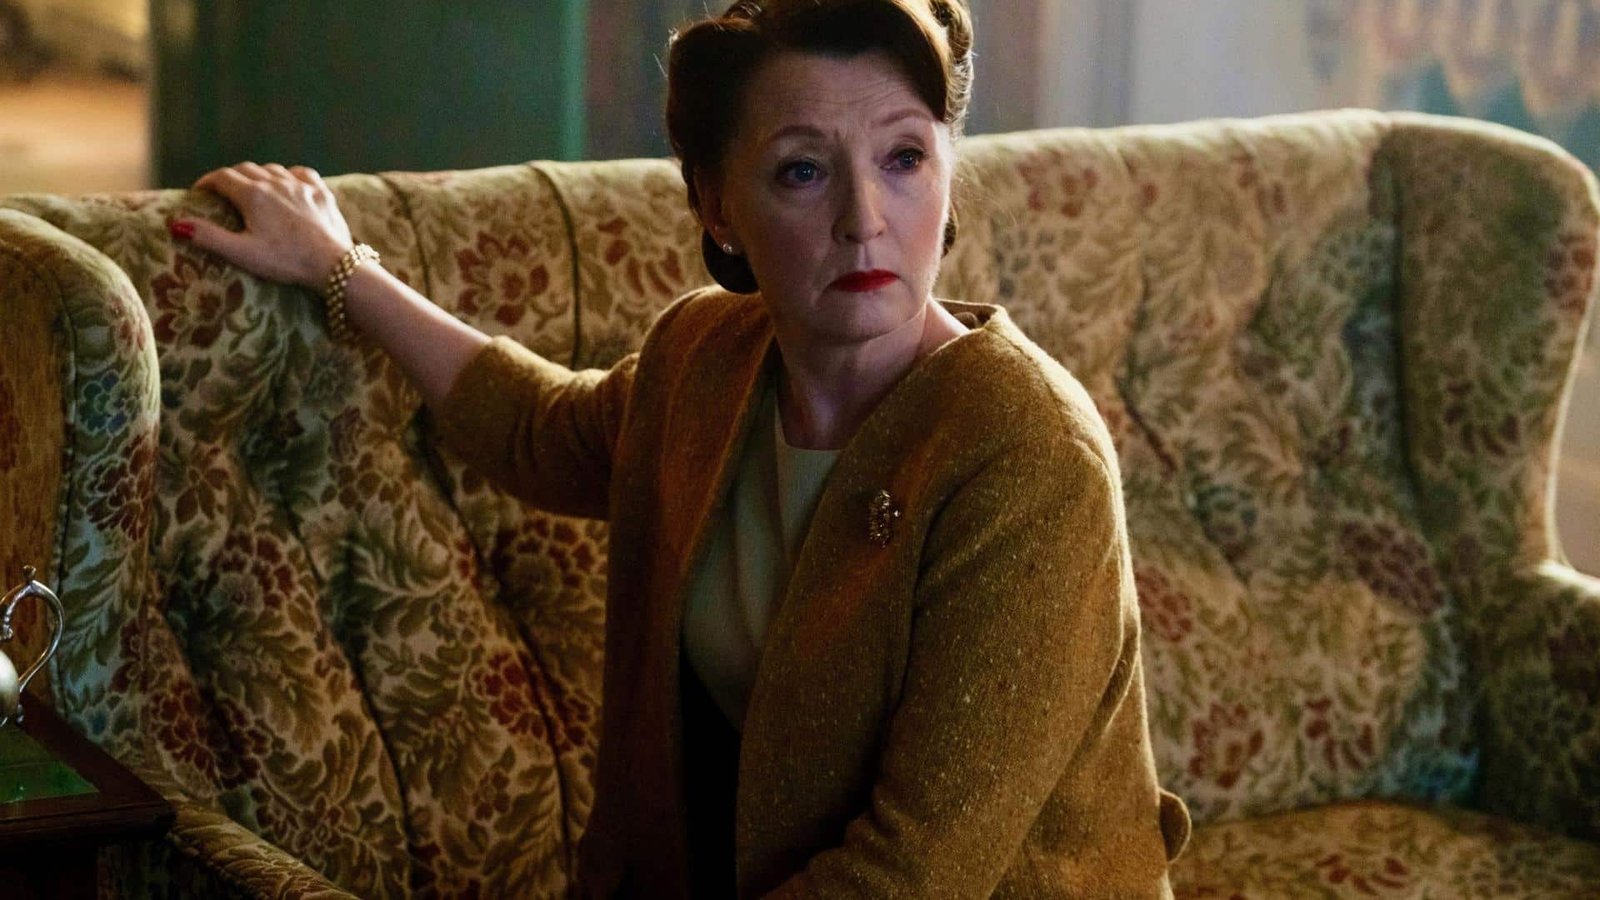 The Crown Season 5 Cast - Ages, Partners, Characters - Lesley Manville as Princess Margaret